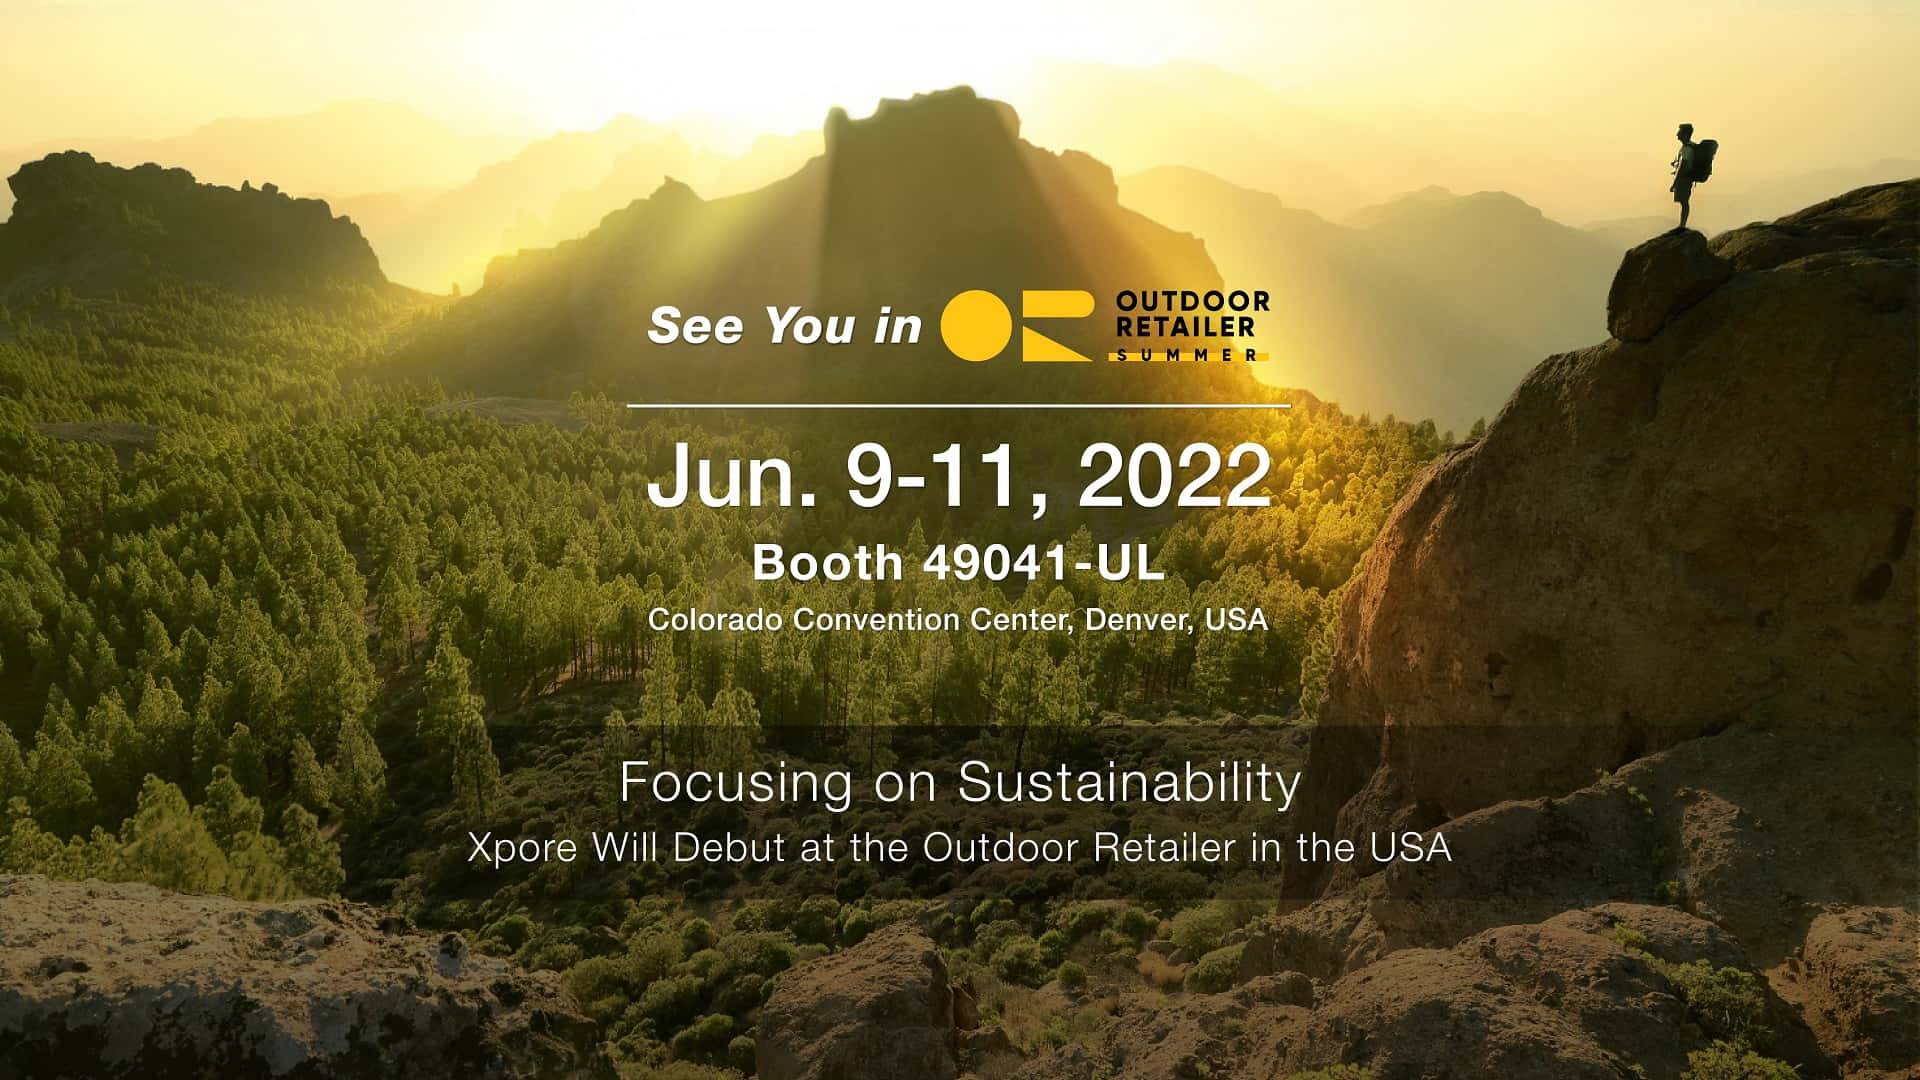 Focusing on Sustainability, Xpore Will Debut at the Outdoor Retailer in the US